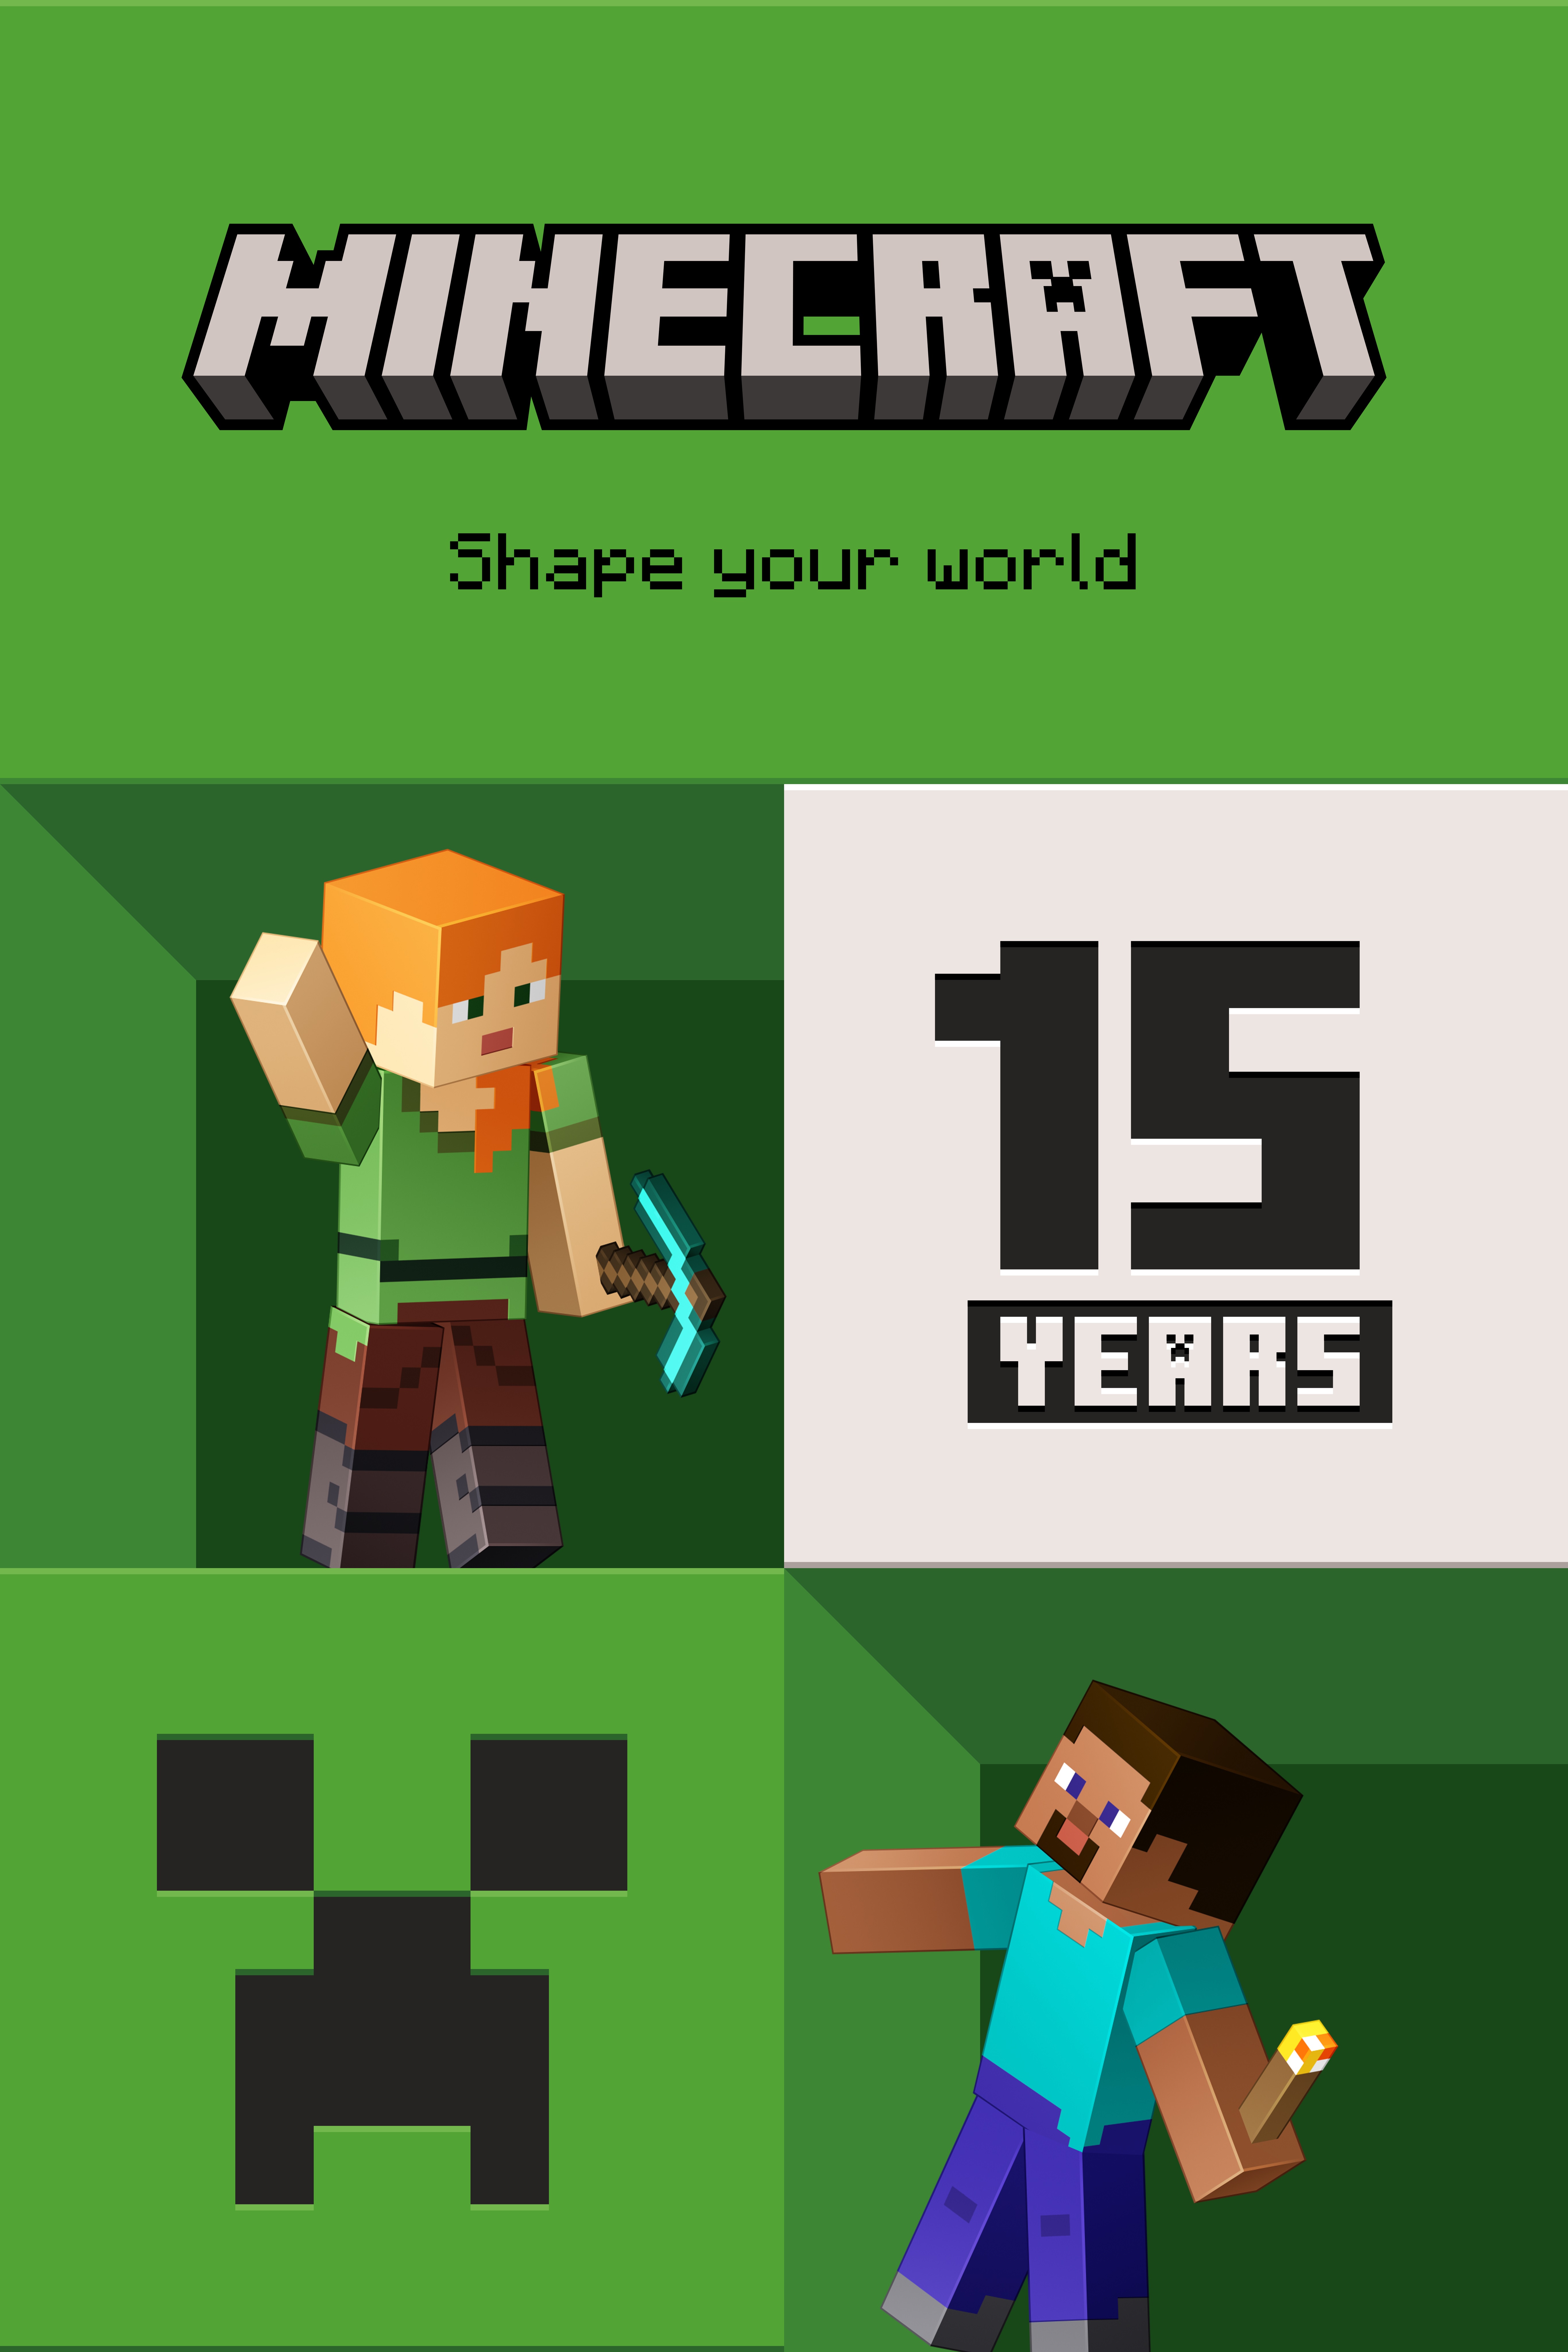 Minecraft figures diagonal to logo and 15 years text